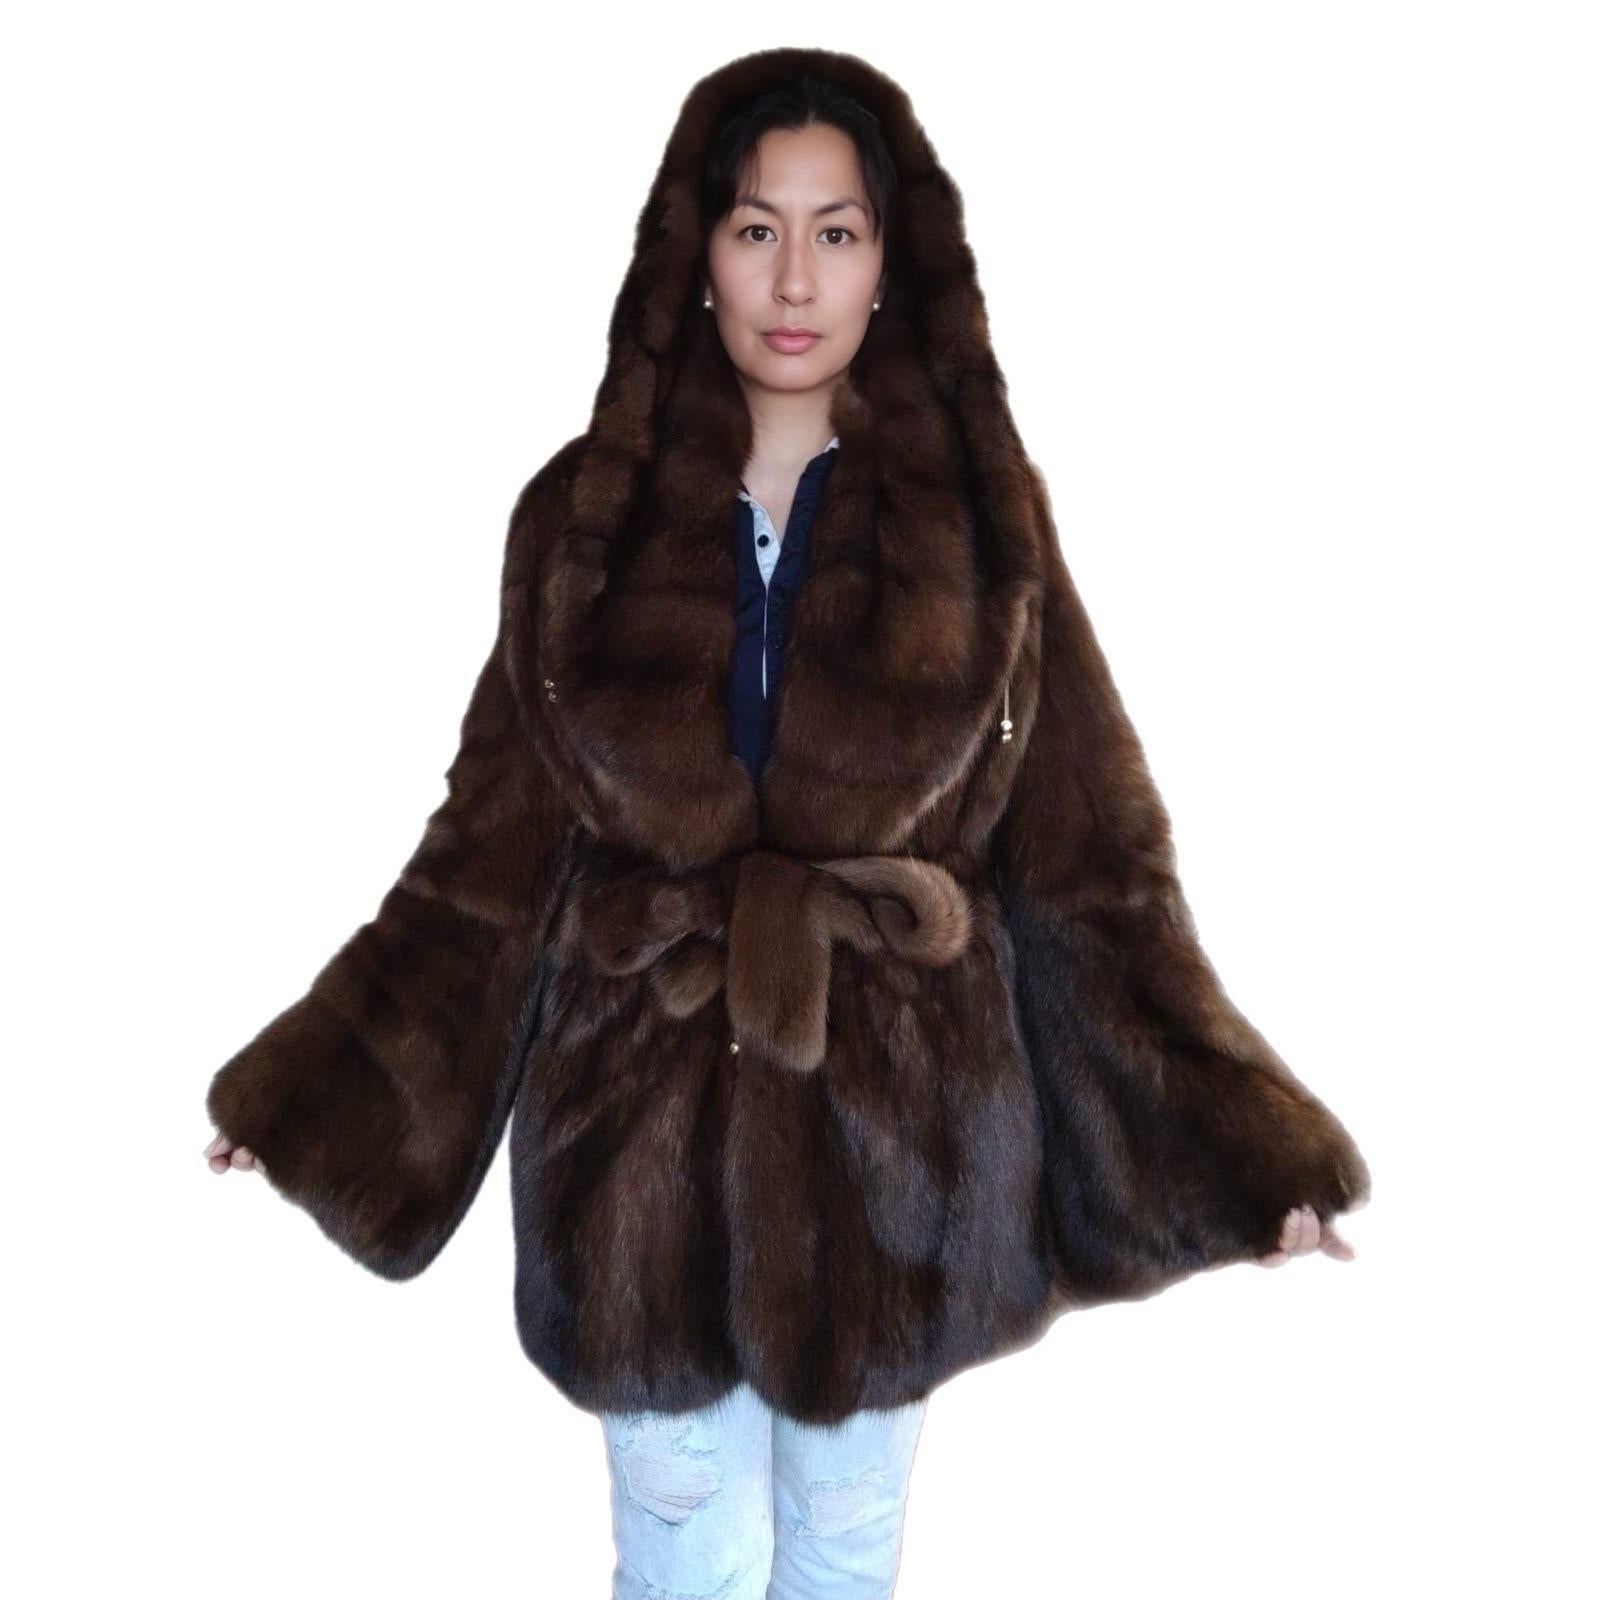 Christian Dior Russian Sable fur coat size 12 tags 55000$ For Sale 13